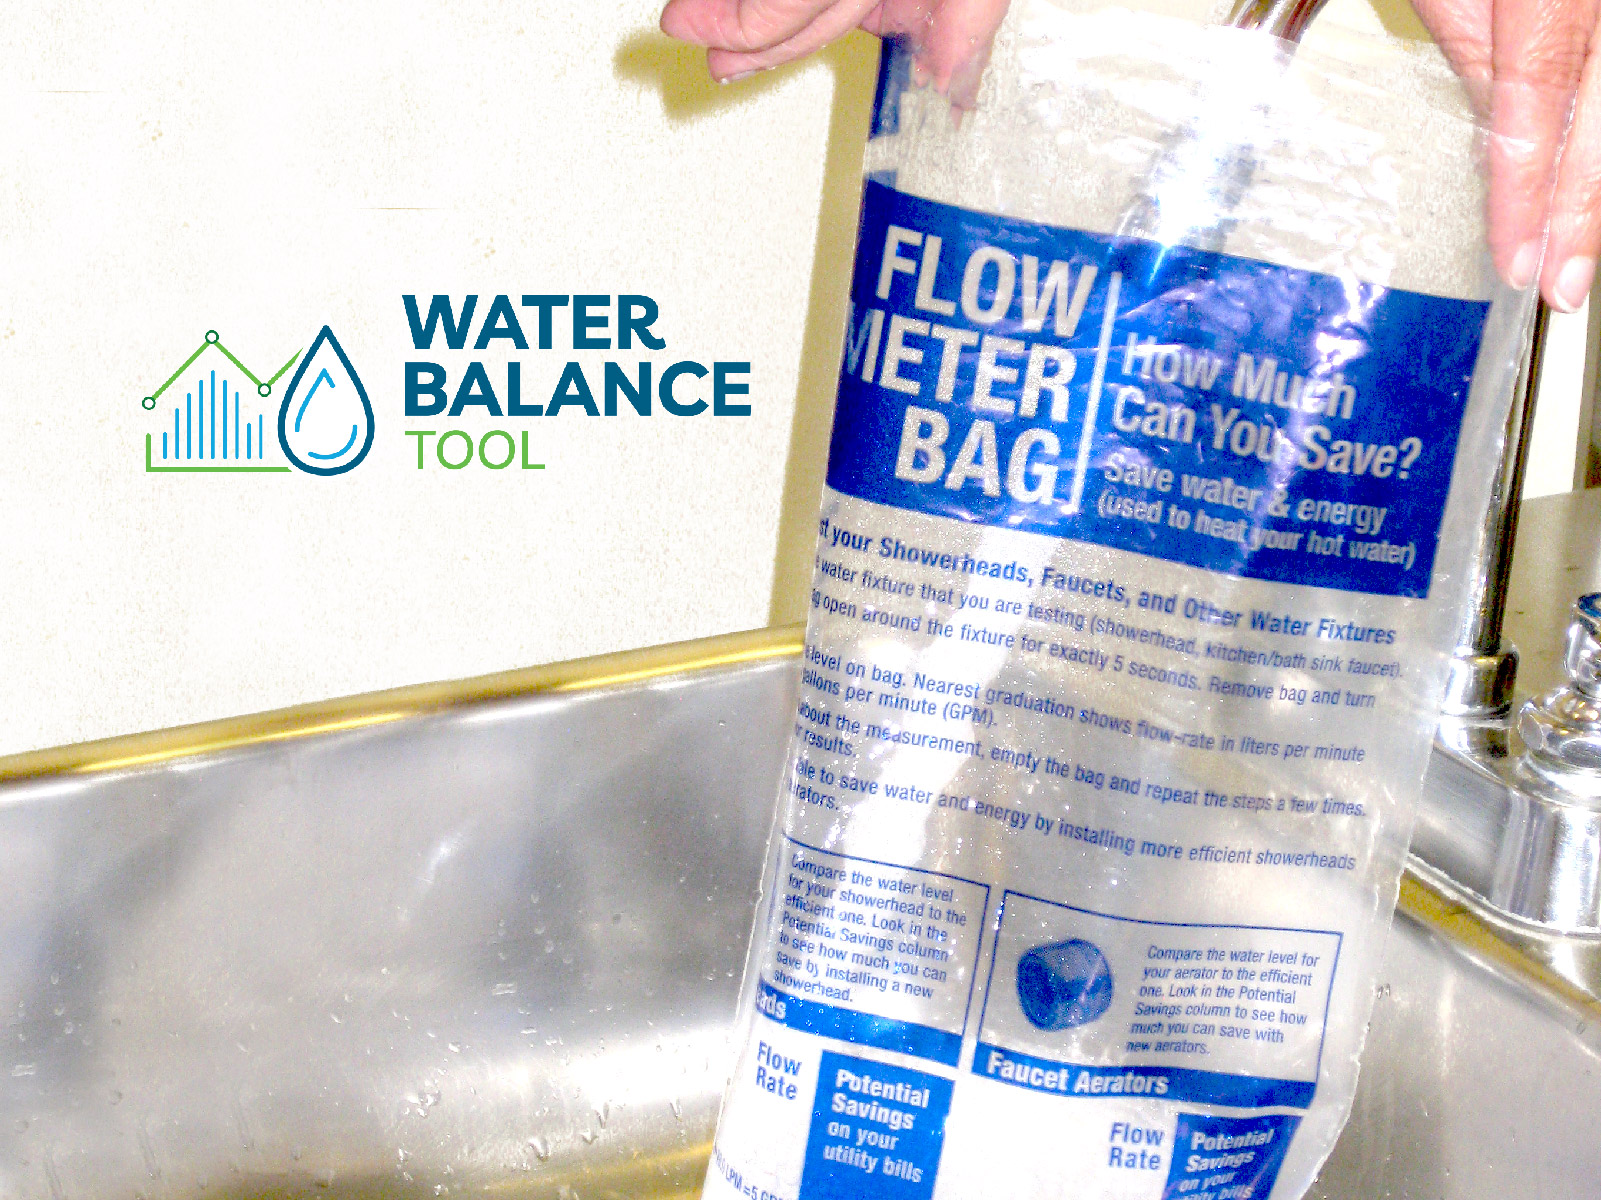 Water Balance Tool Flow Rate Bag Instructions